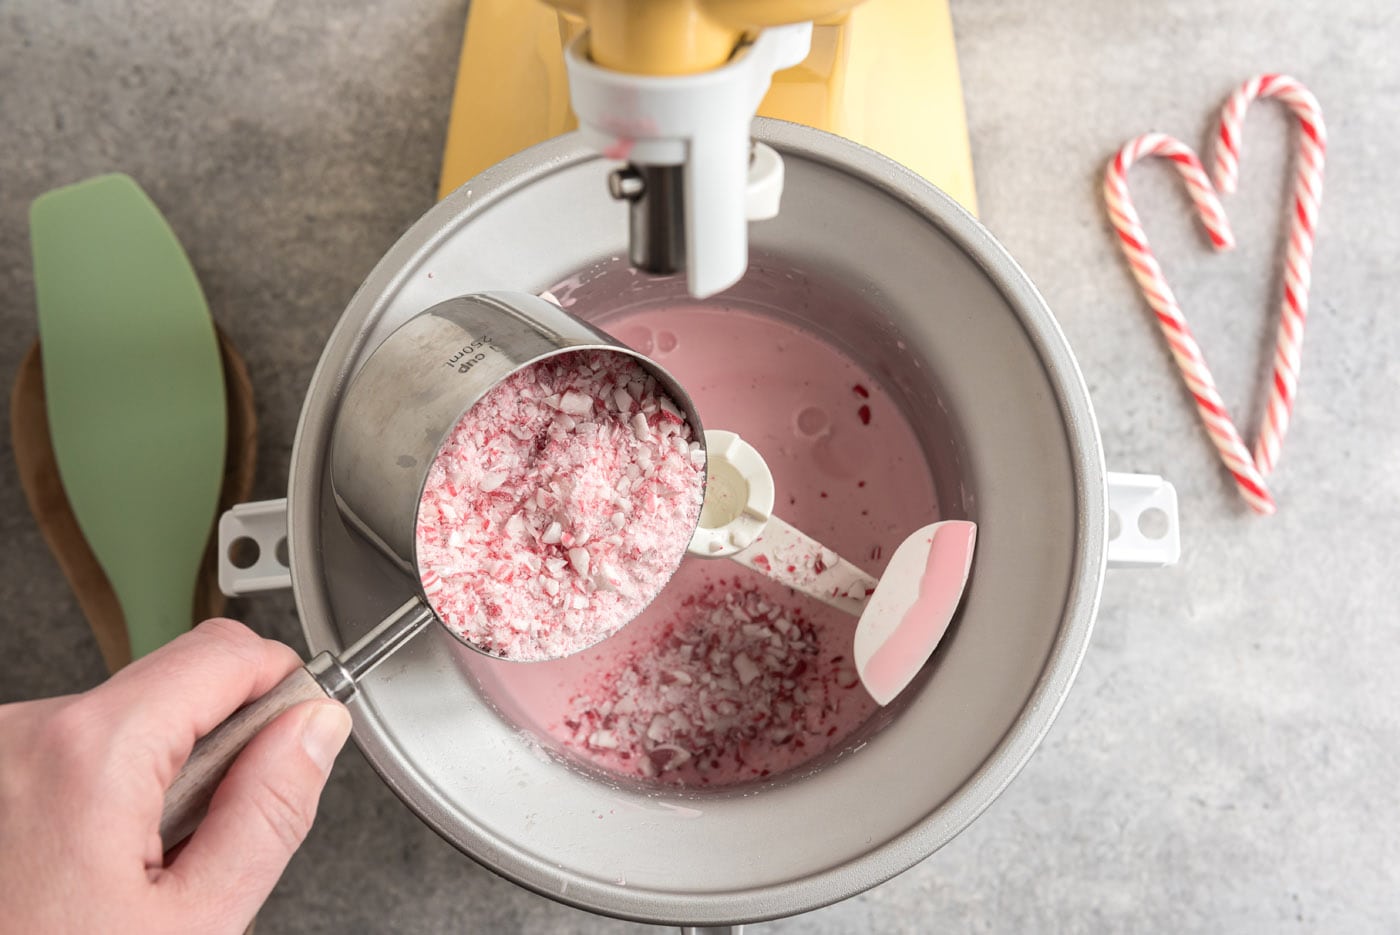 pouring crushed peppermint candies into ice cream maker